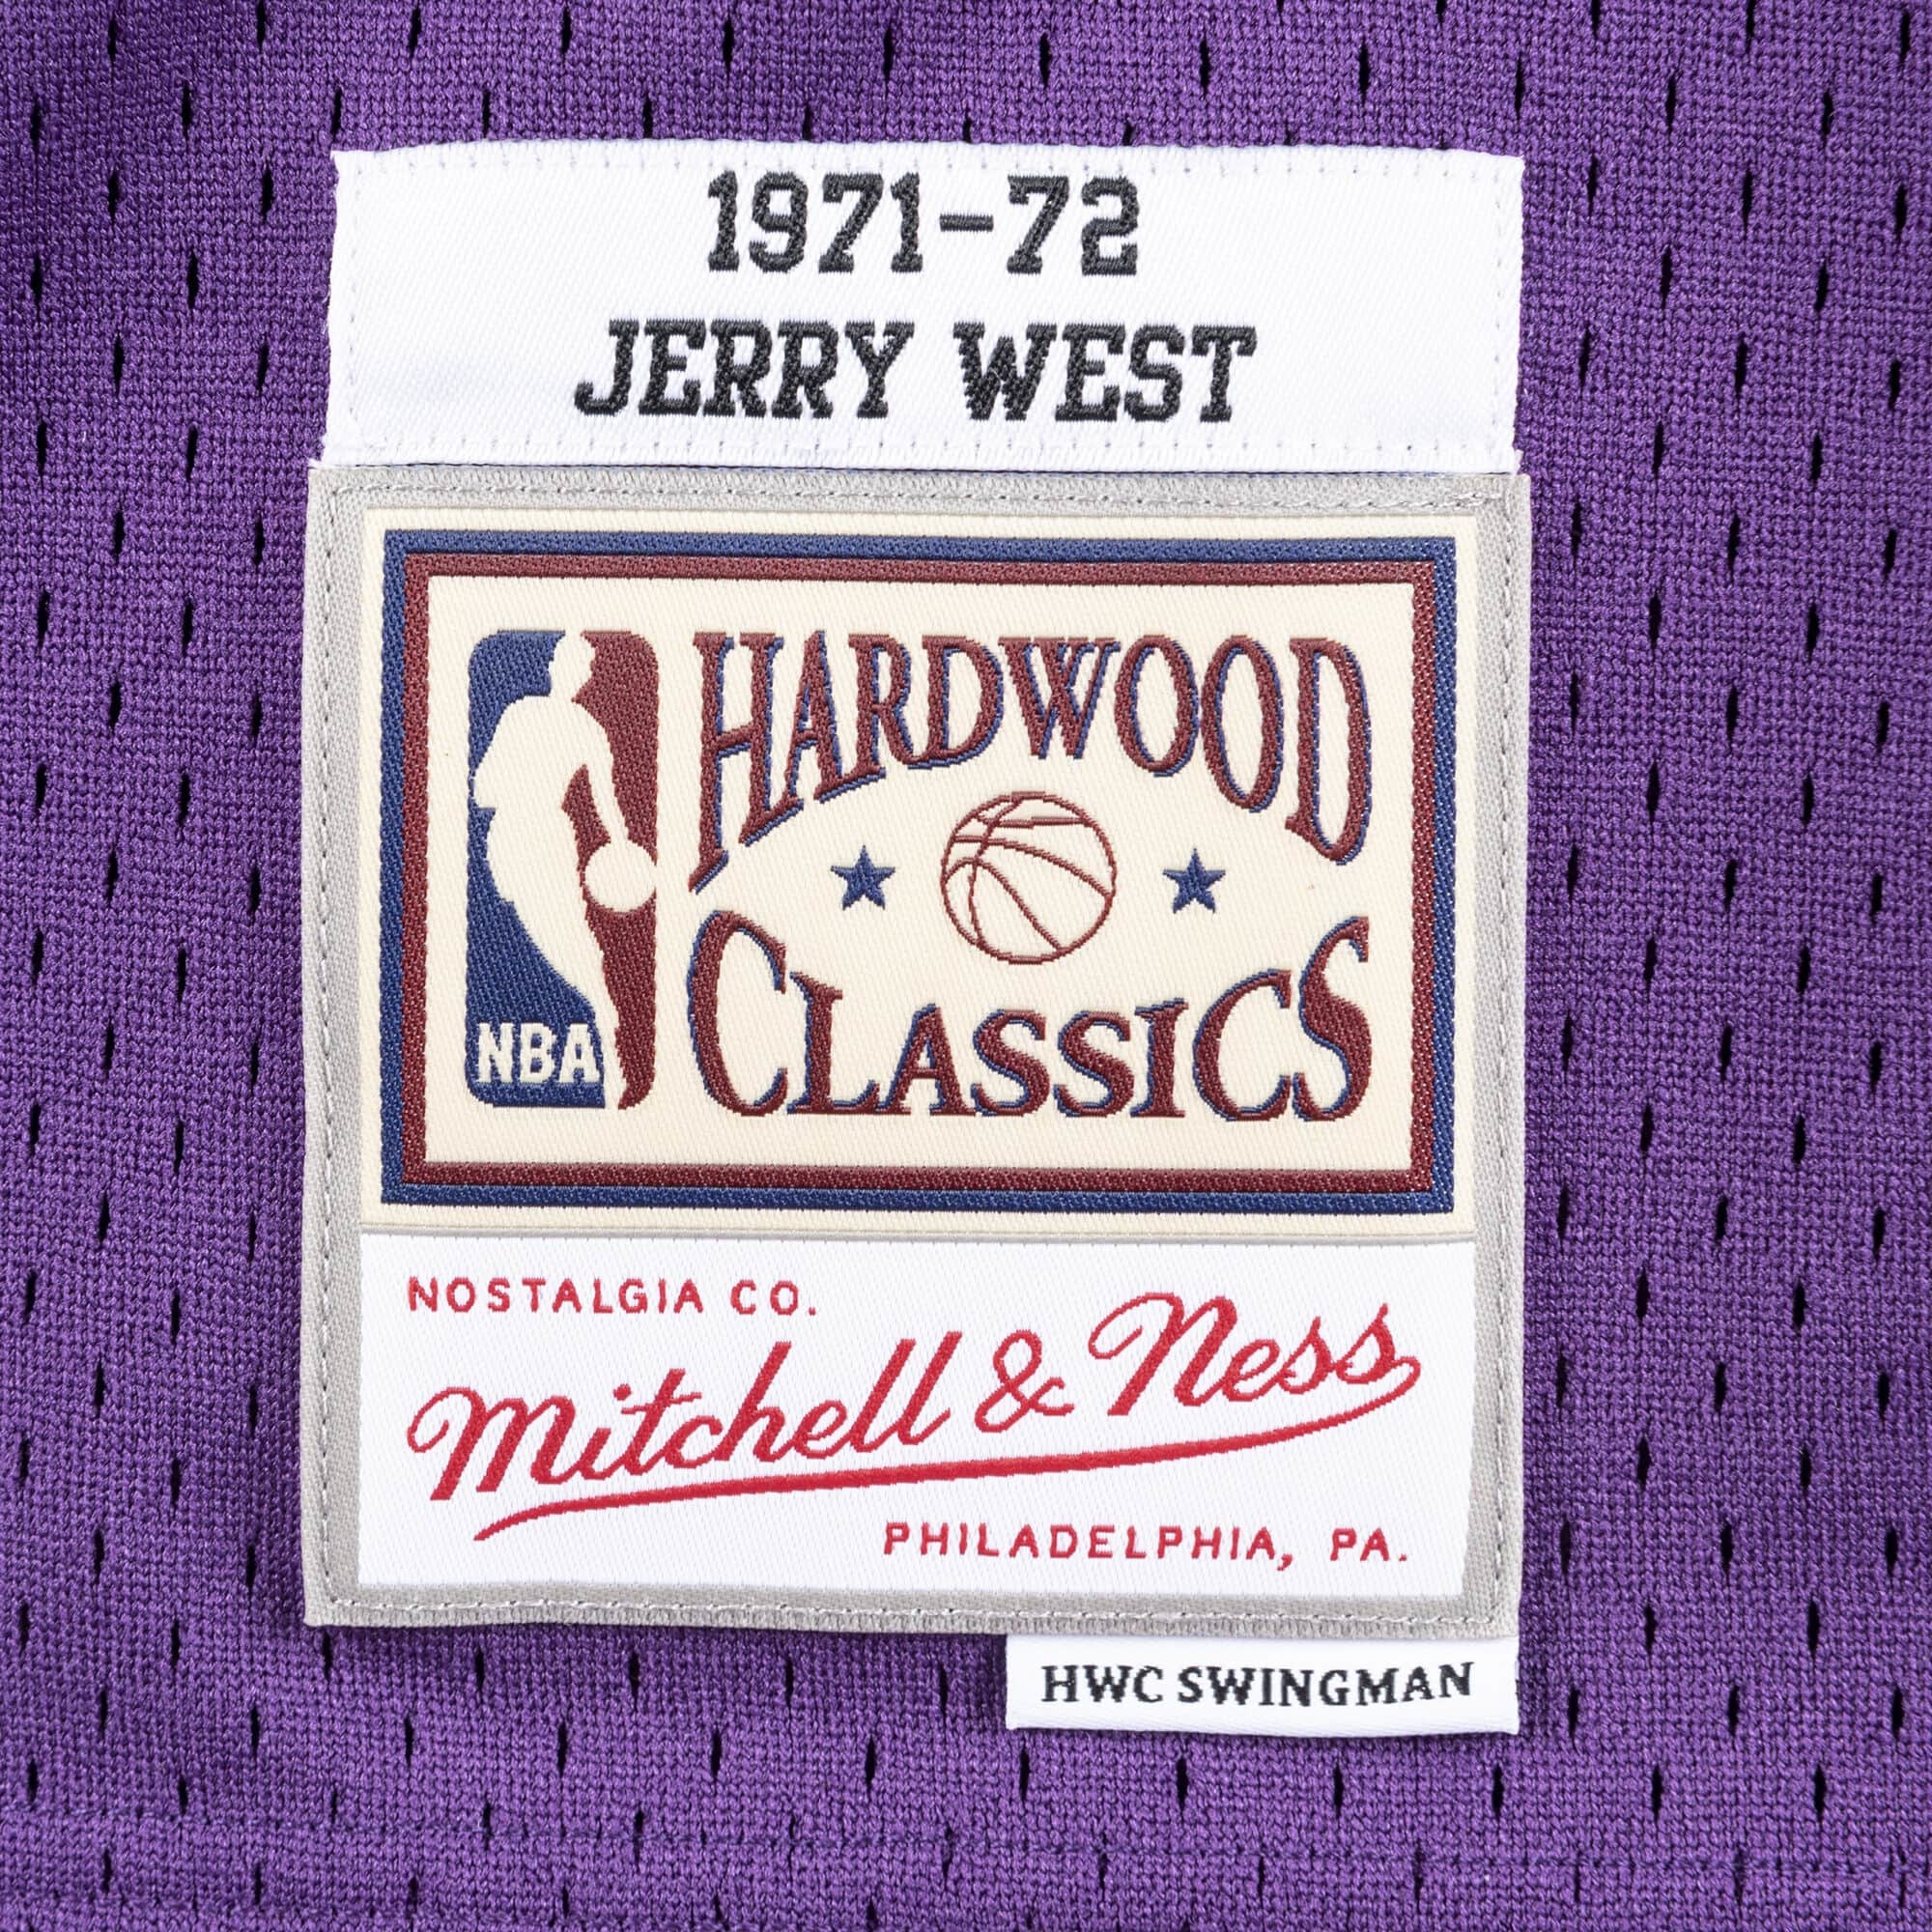 Mitchell & Ness 1971 Men's Los Angeles Lakers Jerry West #44 NBA